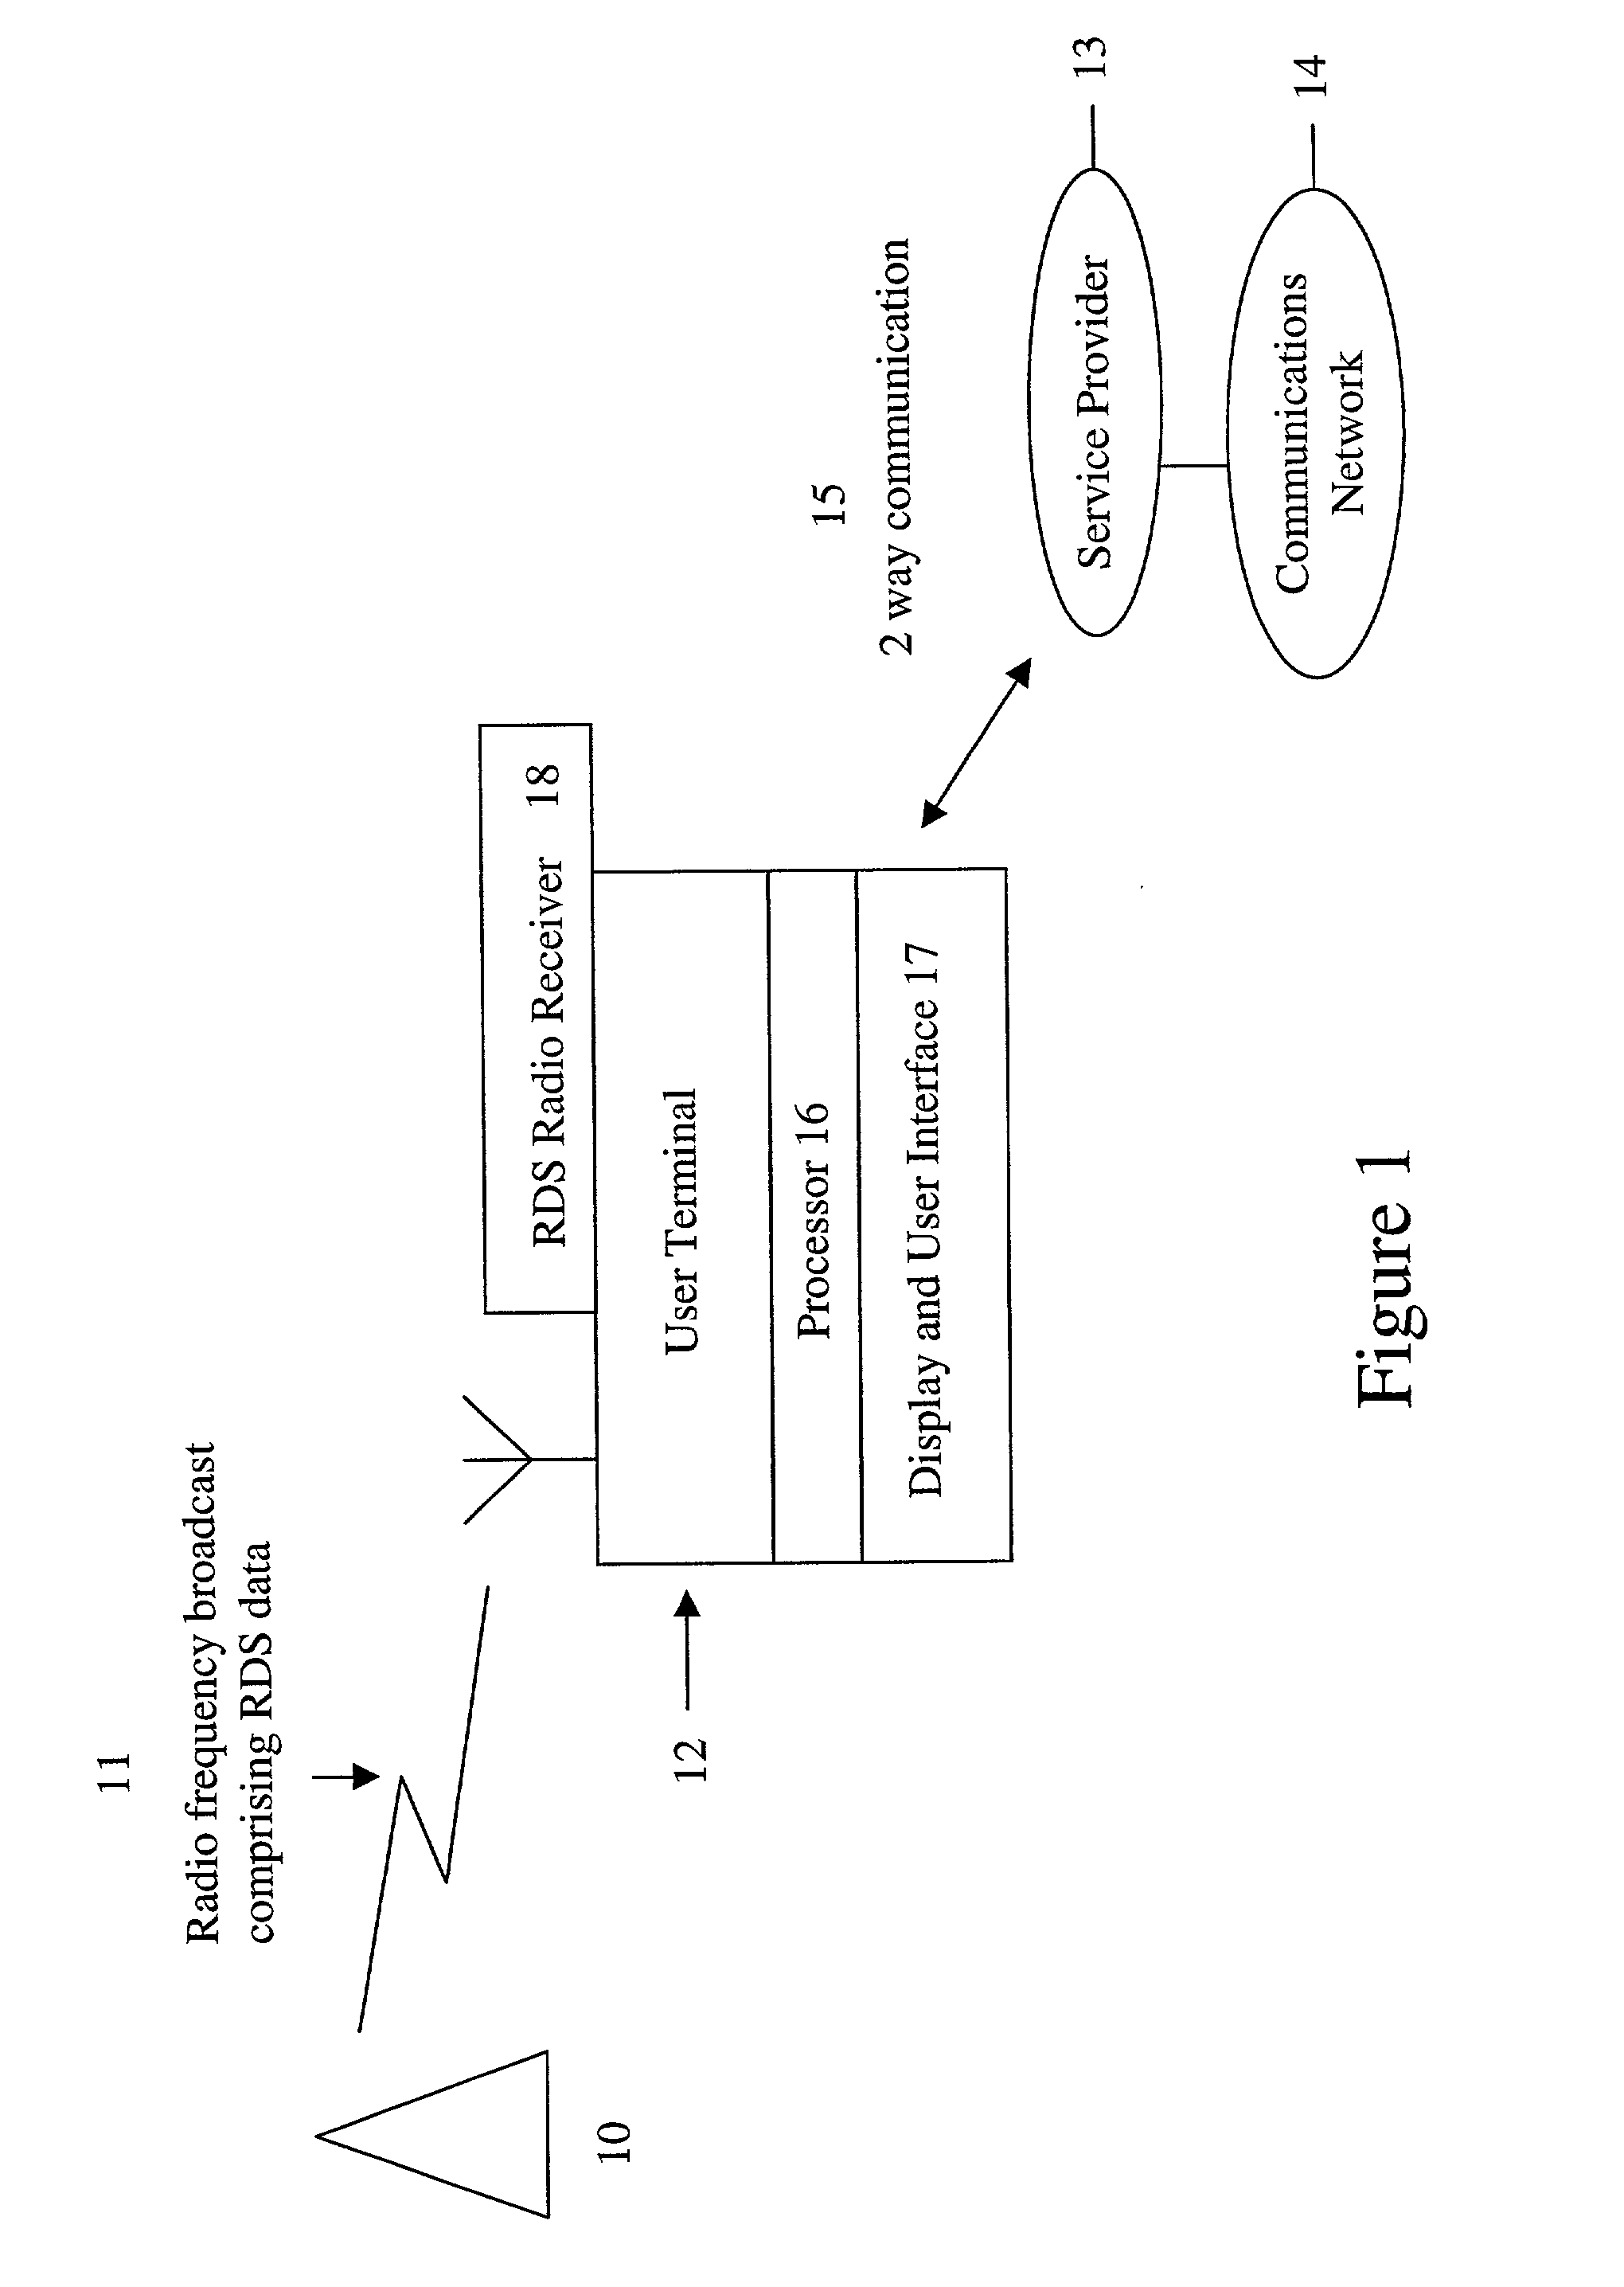 Use of radio data service (RDS) information to automatically access a service provider